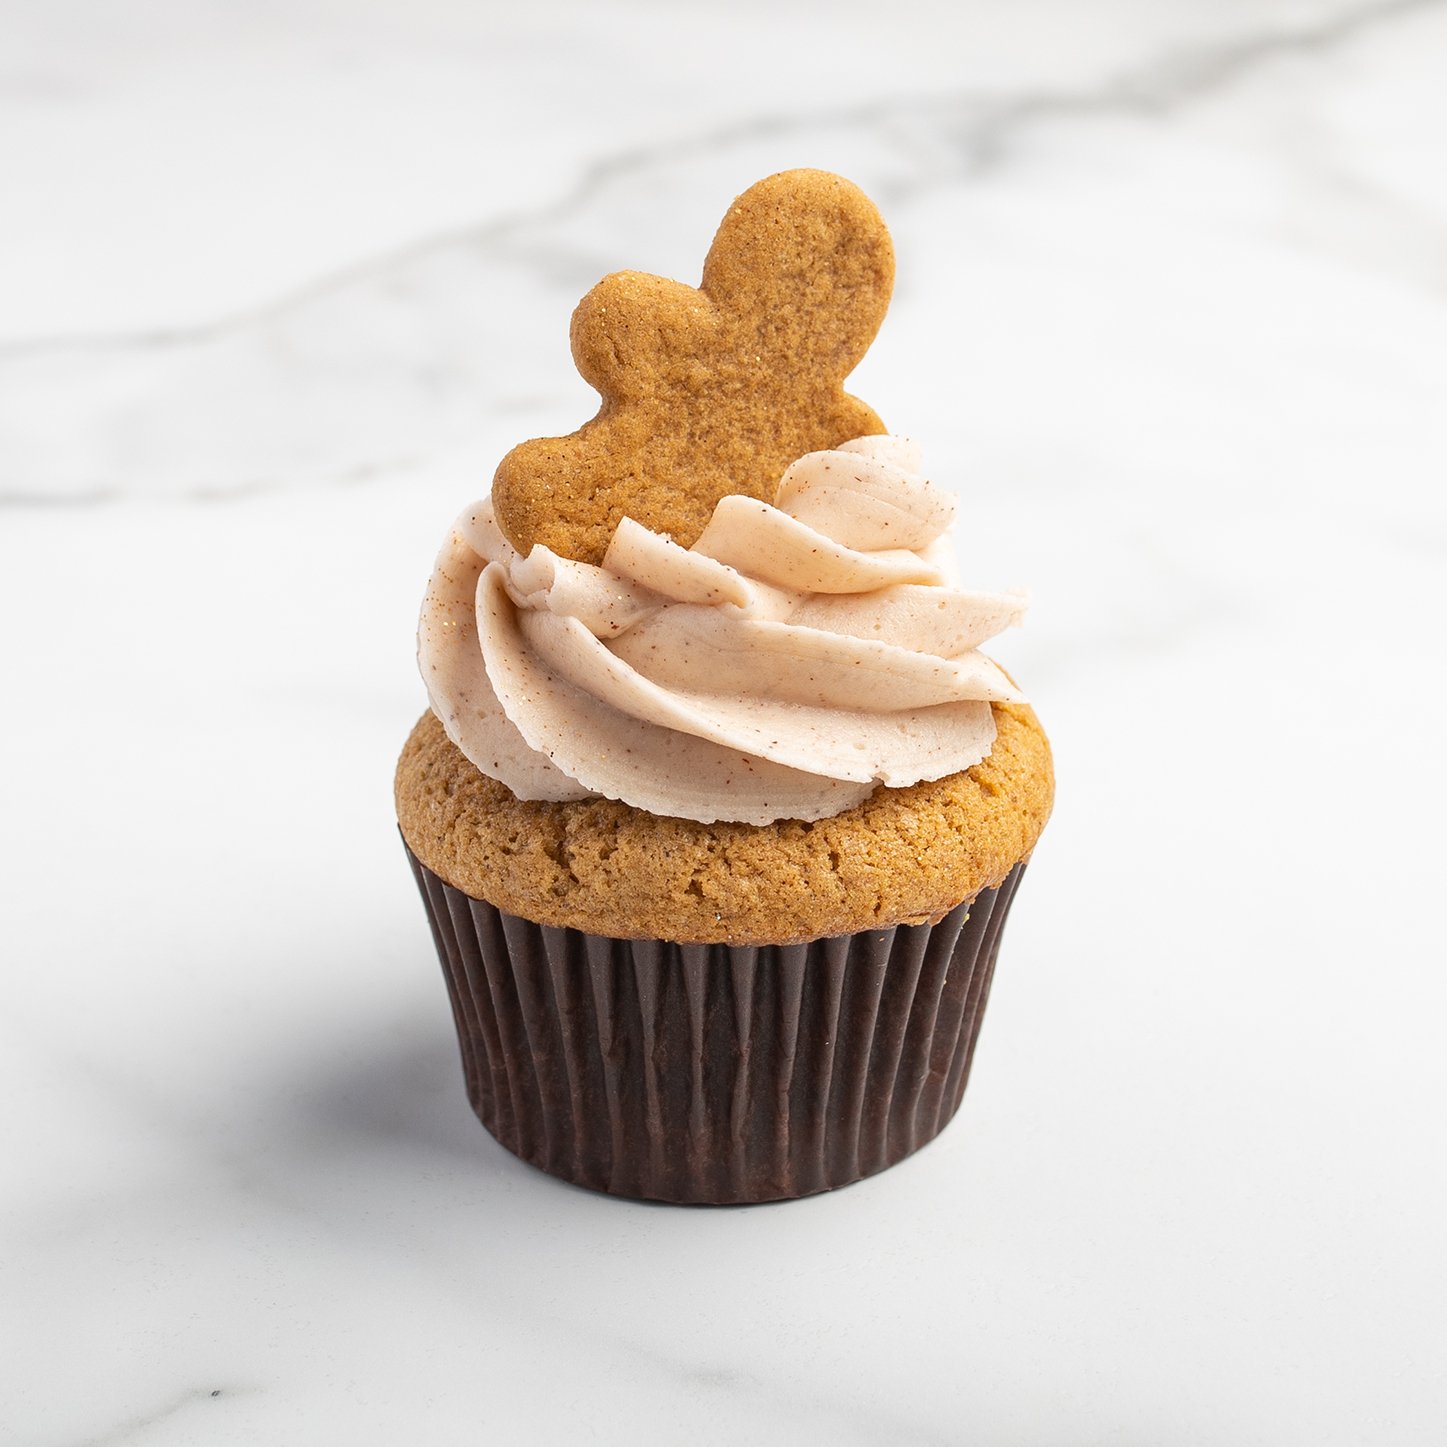 Gingerbread Oh My Cupcakes!